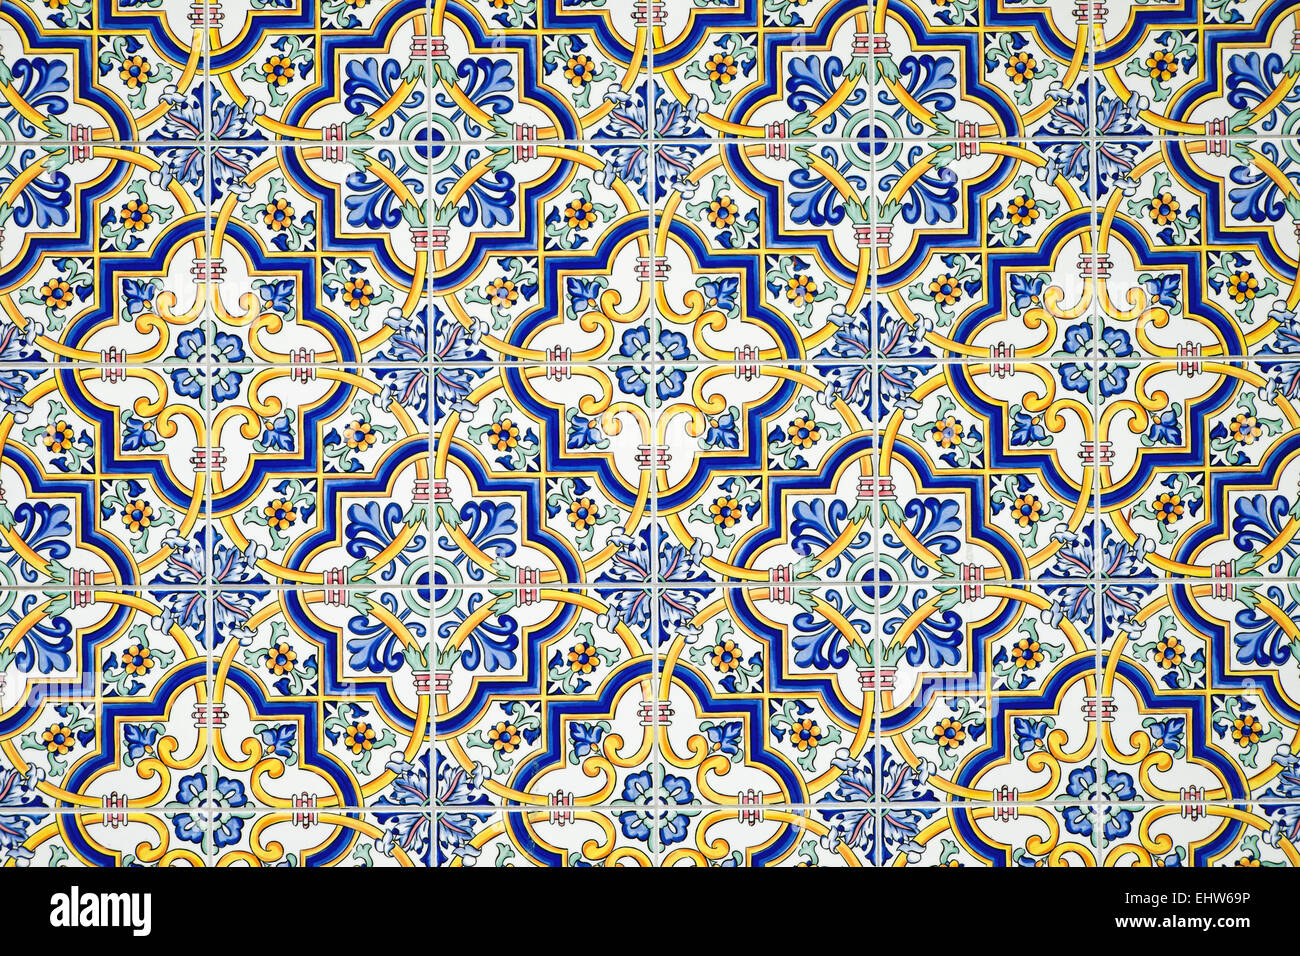 Typical andalusian tiled wall Stock Photo